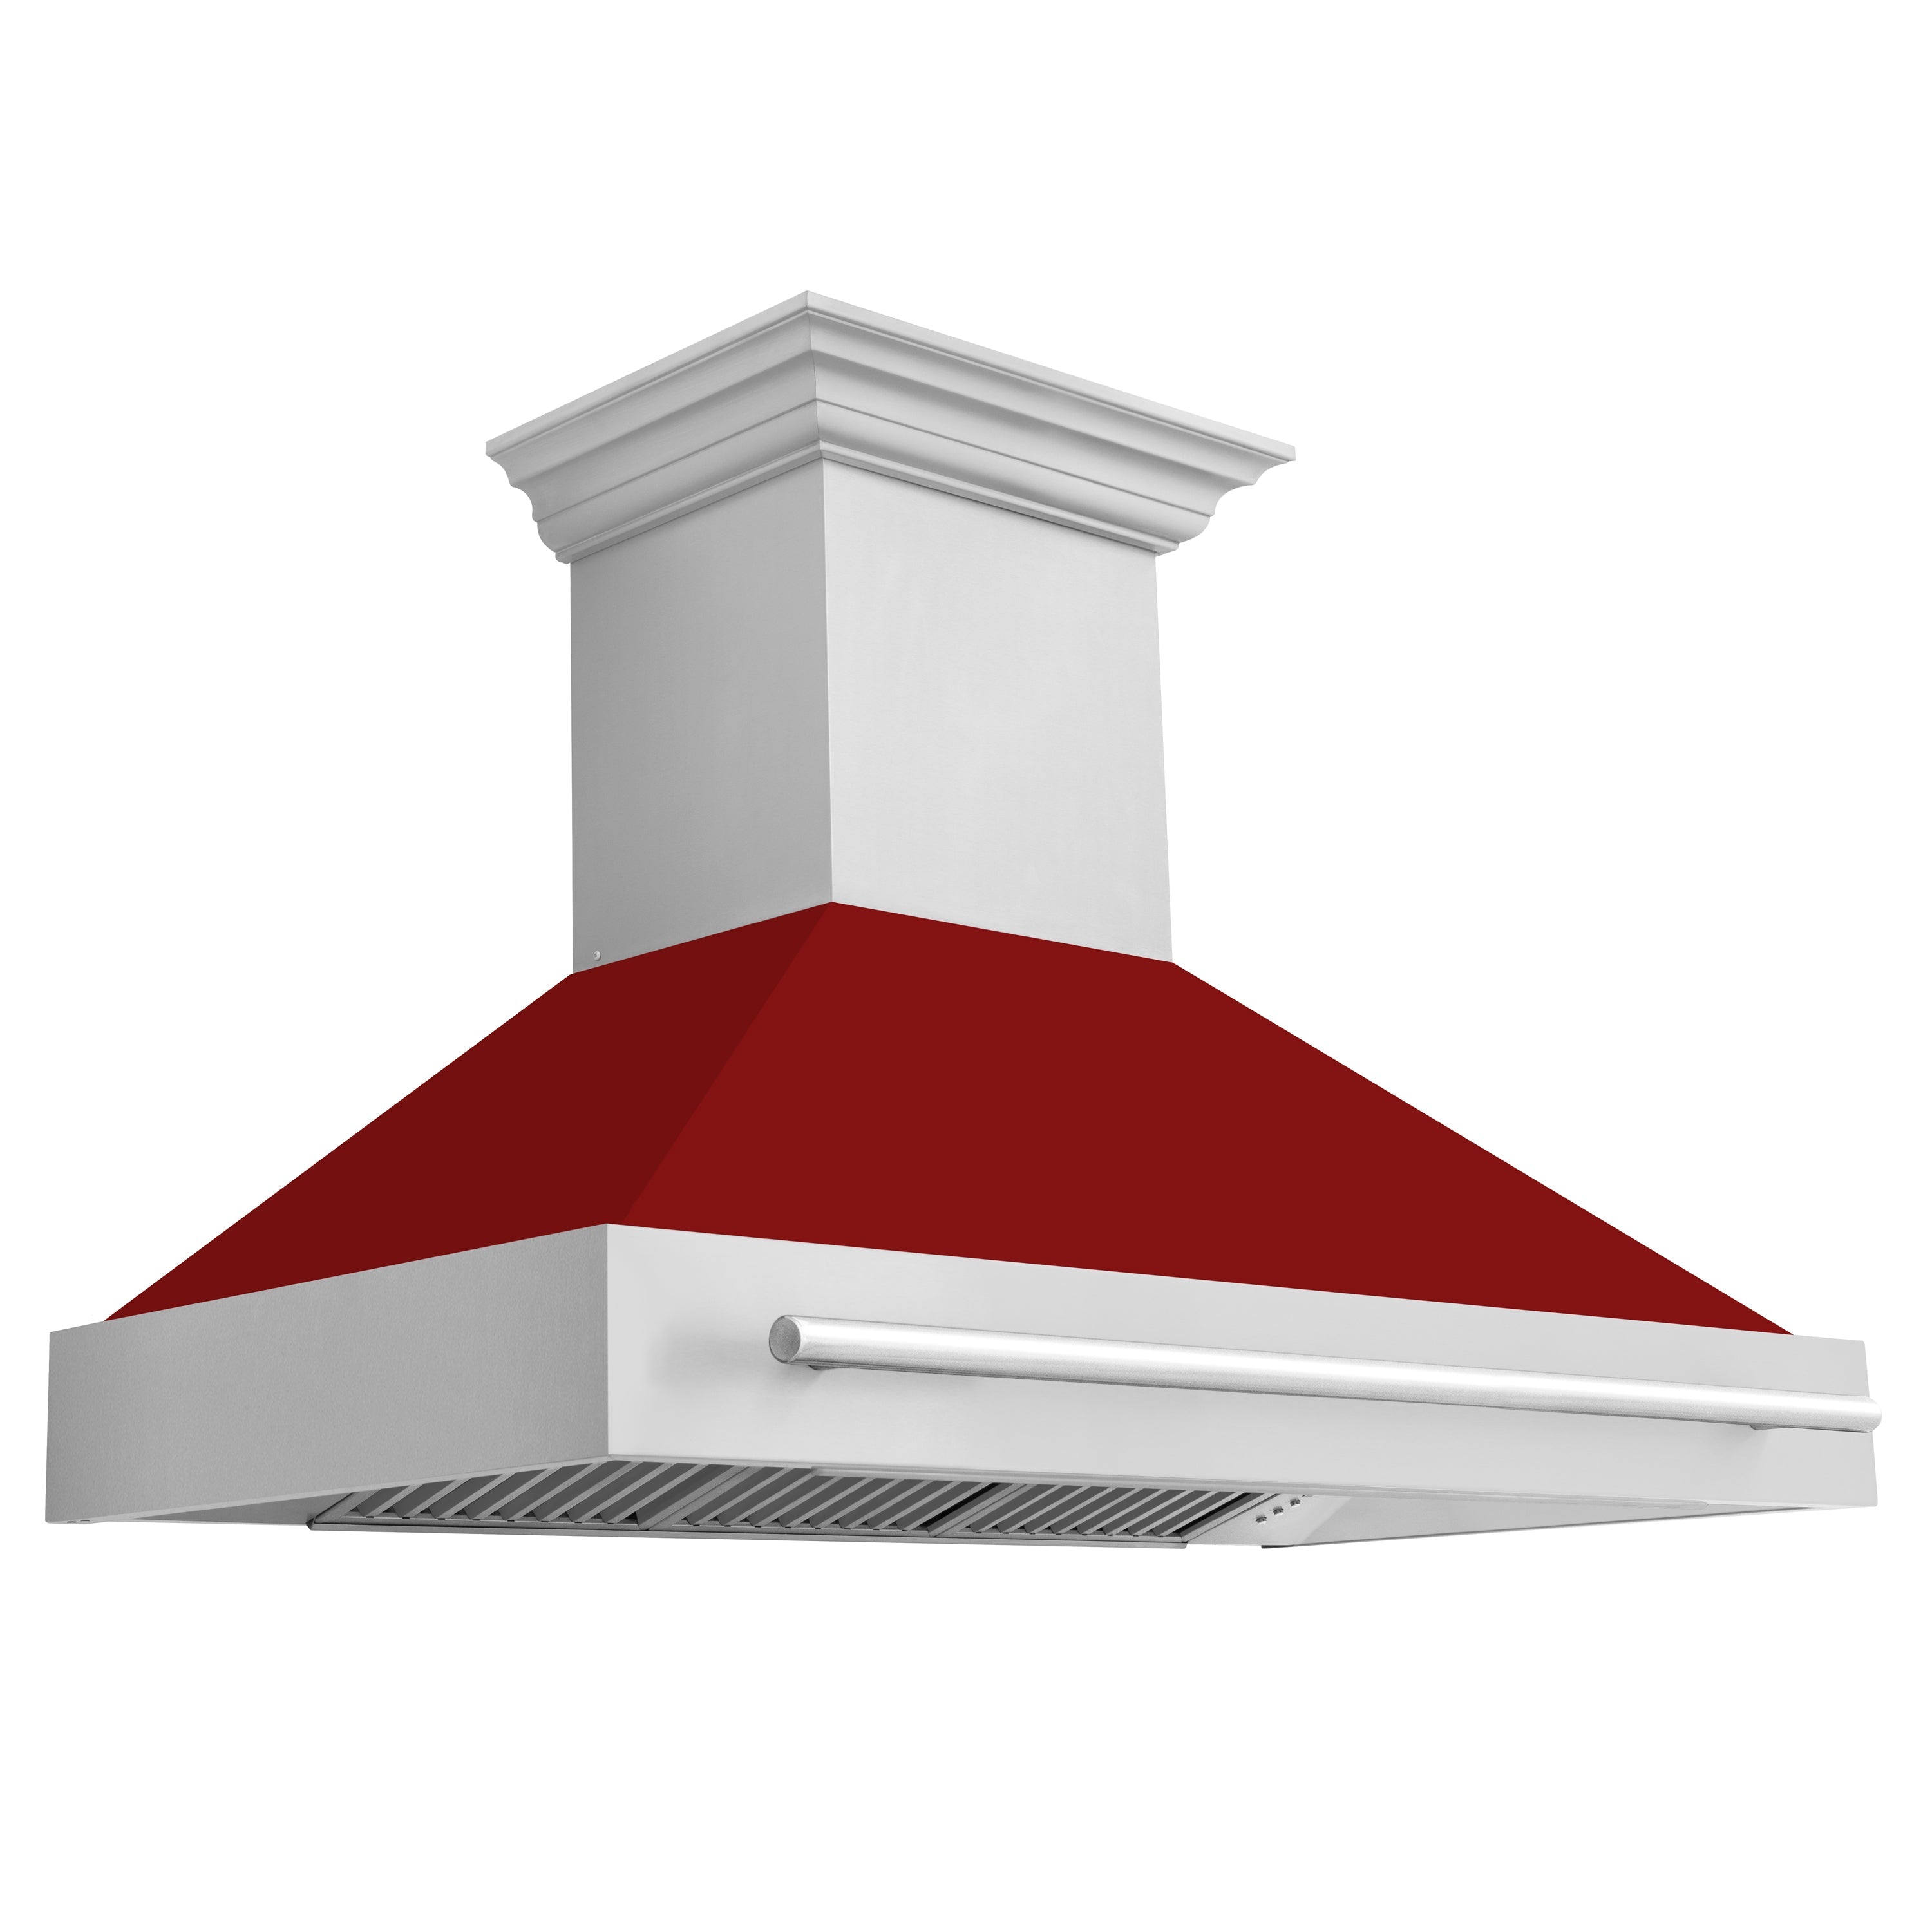 ZLINE 48 in. Stainless Steel Range Hood with Stainless Steel Handle (8654STX-48) Red Gloss